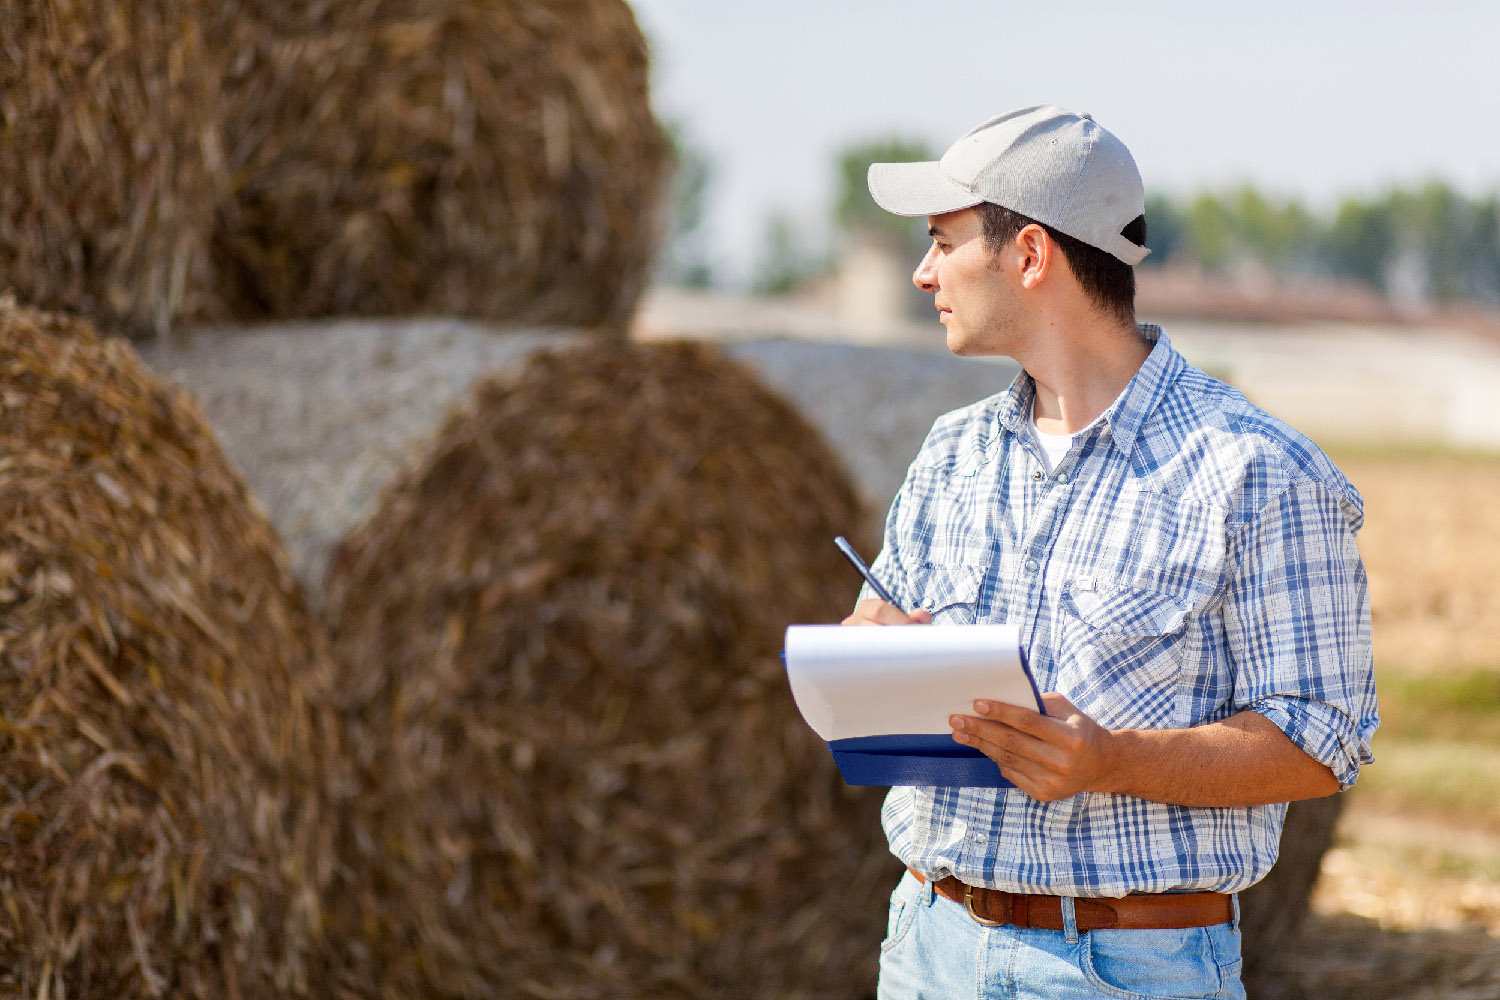 Man with clipboard looks over stacked hay round bales on a sunny day.